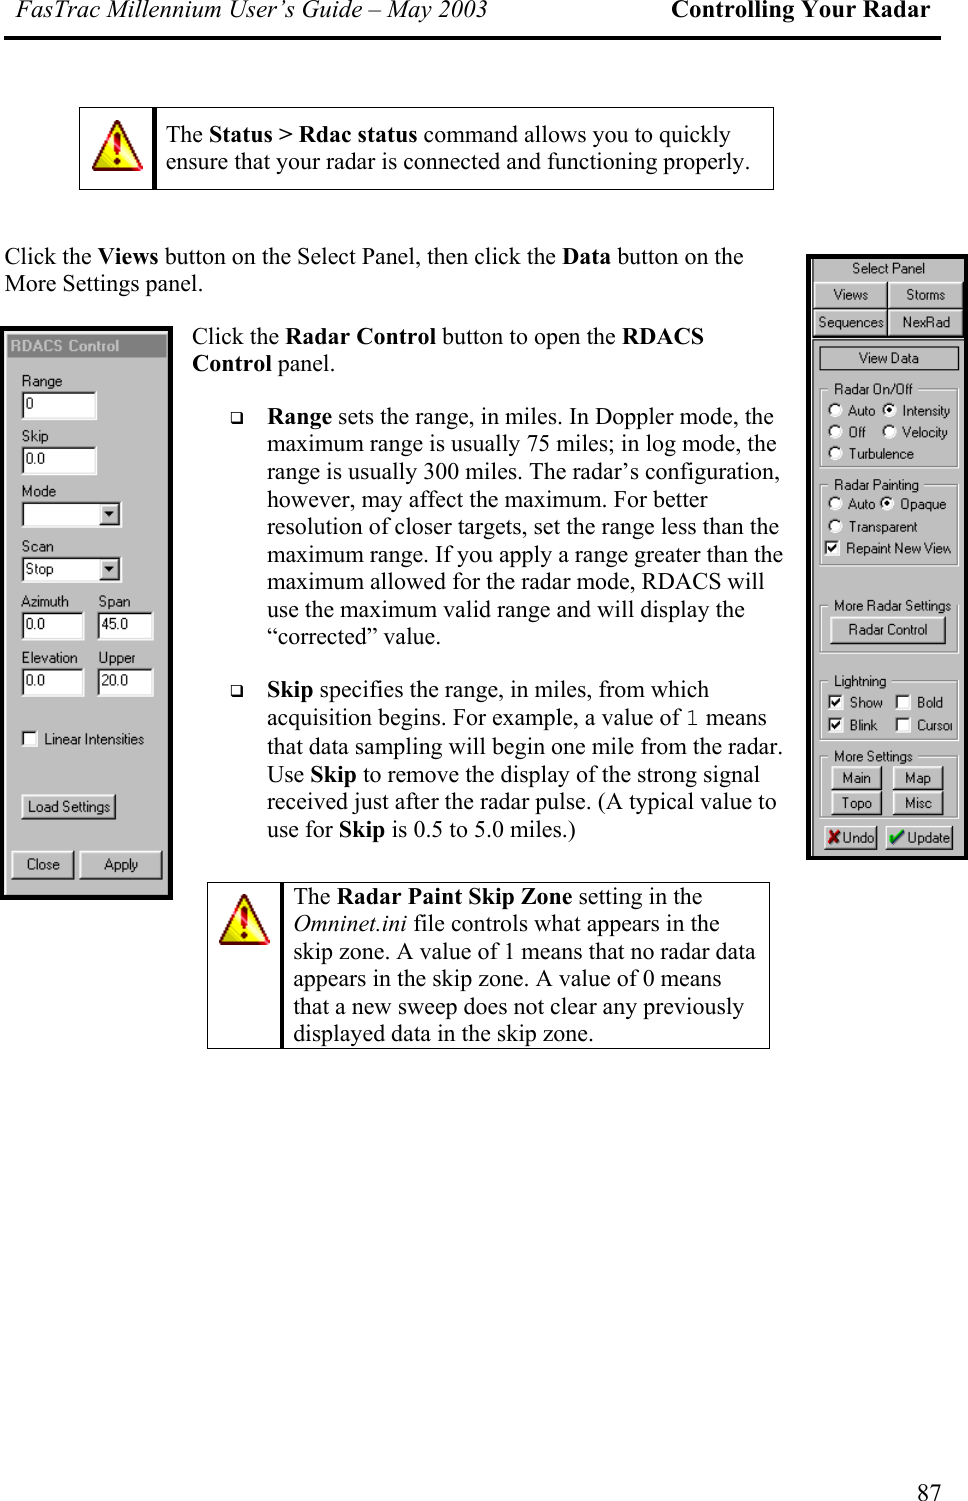 FasTrac Millennium User’s Guide – May 2003 Controlling Your Radar  The Status &gt; Rdac status command allows you to quickly ensure that your radar is connected and functioning properly.  Click the Views button on the Select Panel, then click the Data button on the More Settings panel. Click the Radar Control button to open the RDACS Control panel.   Range sets the range, in miles. In Doppler mode, the maximum range is usually 75 miles; in log mode, the range is usually 300 miles. The radar’s configuration, however, may affect the maximum. For better resolution of closer targets, set the range less than the maximum range. If you apply a range greater than the maximum allowed for the radar mode, RDACS will use the maximum valid range and will display the “corrected” value.   Skip specifies the range, in miles, from which acquisition begins. For example, a value of 1 means that data sampling will begin one mile from the radar. Use Skip to remove the display of the strong signal received just after the radar pulse. (A typical value to use for Skip is 0.5 to 5.0 miles.)   The Radar Paint Skip Zone setting in the Omninet.ini file controls what appears in the skip zone. A value of 1 means that no radar data appears in the skip zone. A value of 0 means that a new sweep does not clear any previously displayed data in the skip zone. 87 